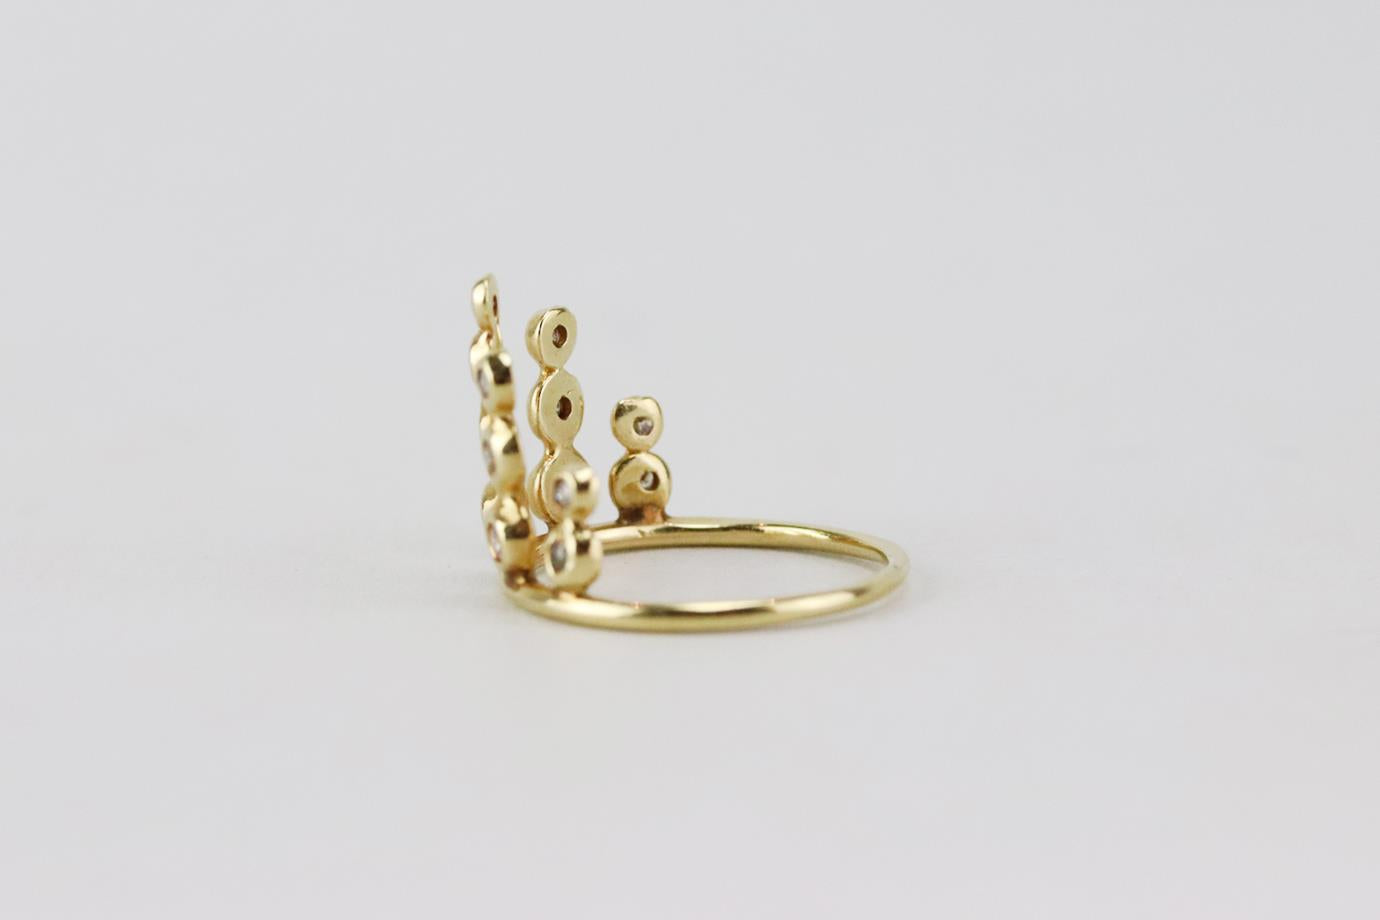 JACQUIE AICHE 14K YELLOW GOLD PAVE DIAMOND STACK RING 16 MM